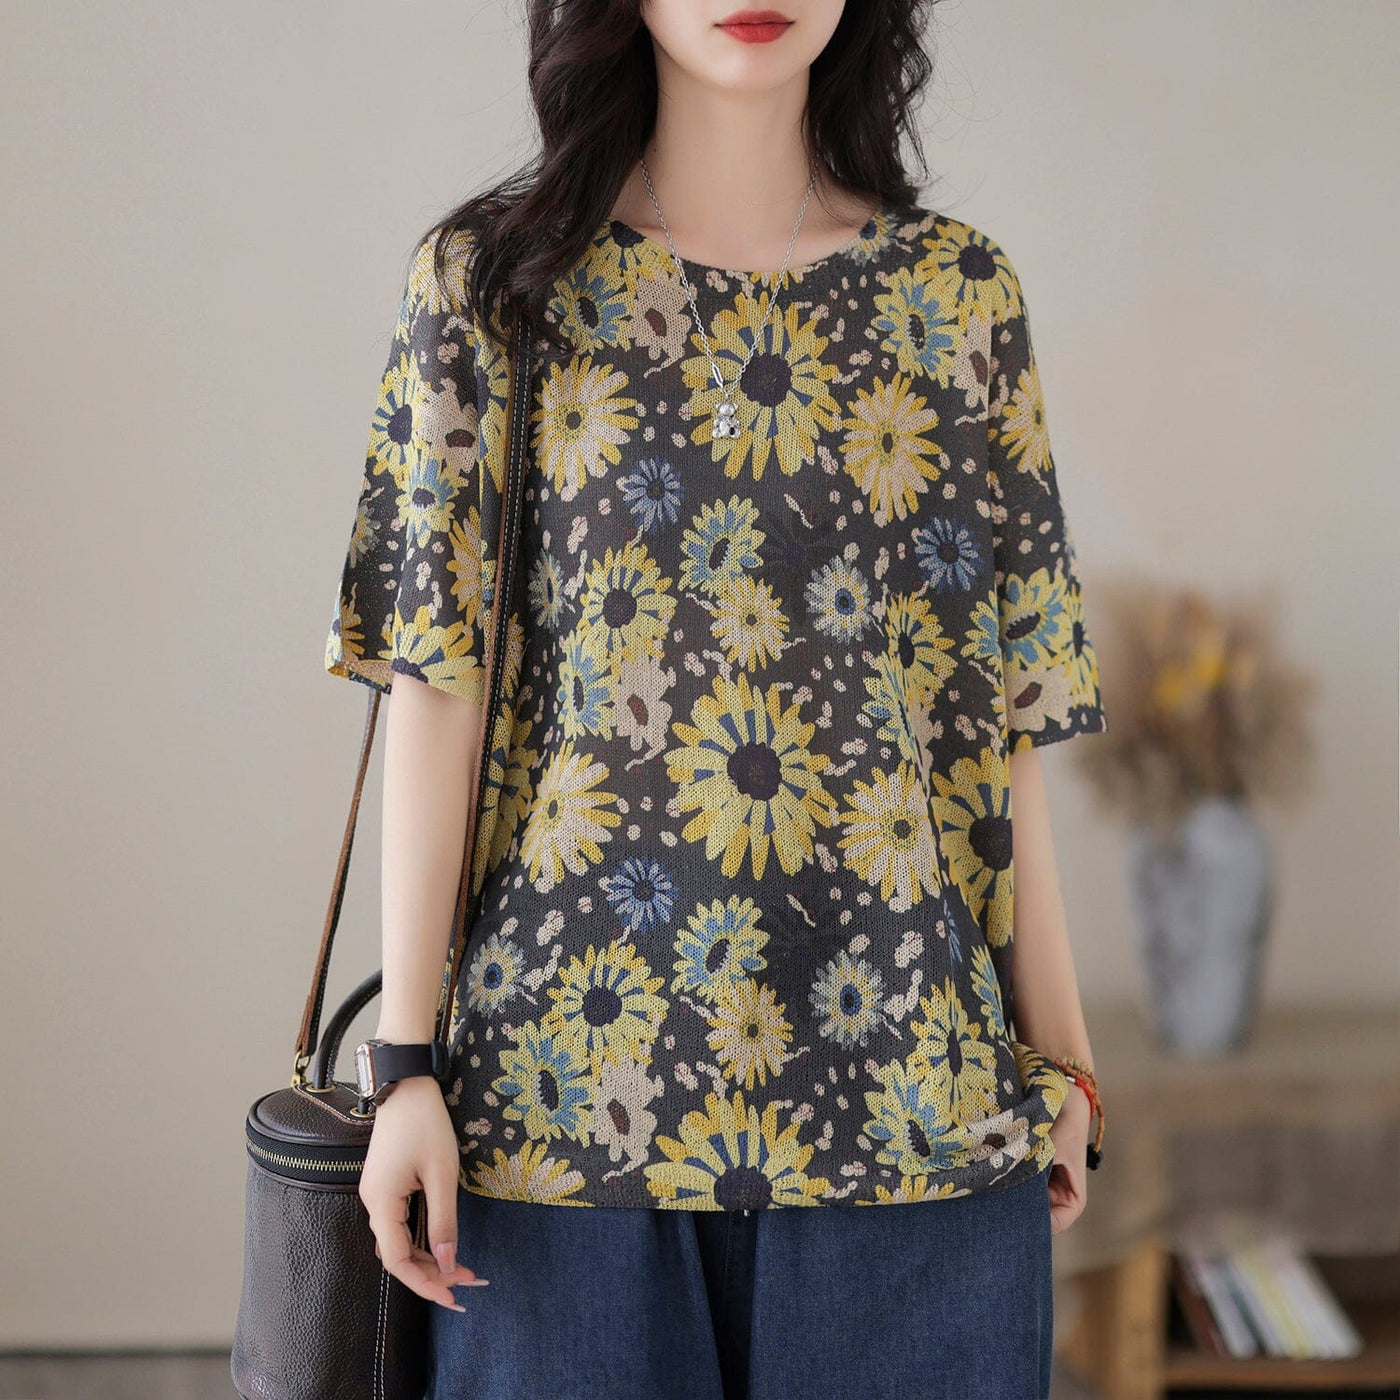 Summer Stylish Casual Floral Print Cotton Knitted T-Shirt